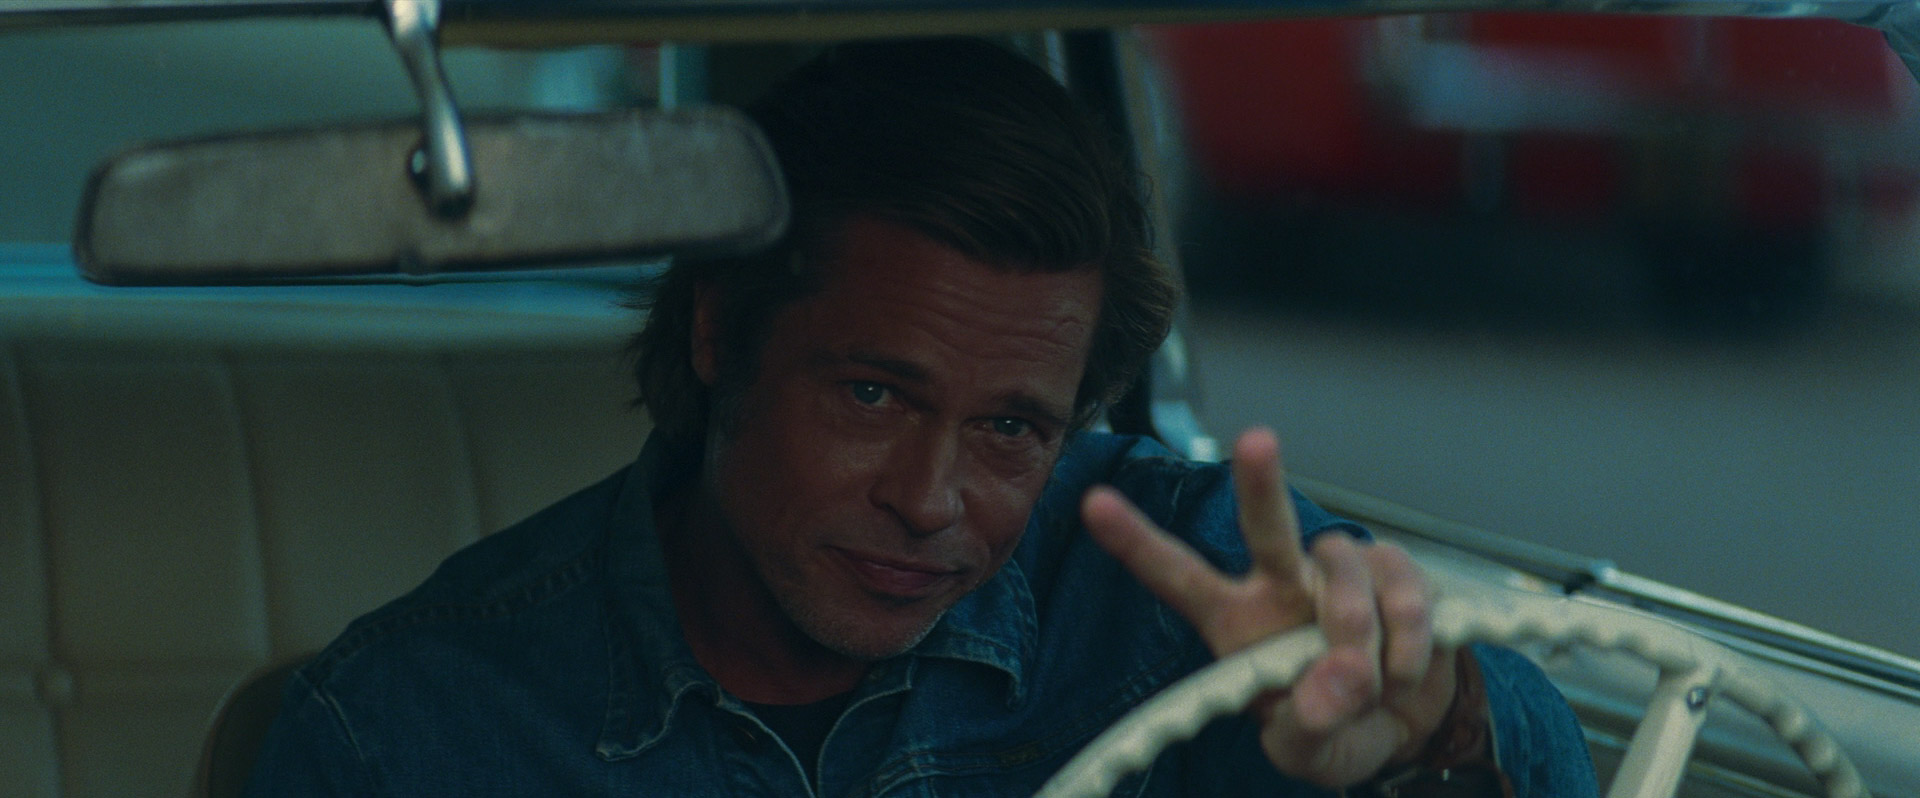 Brad Pitt in Once Upon a Time… in Hollywood